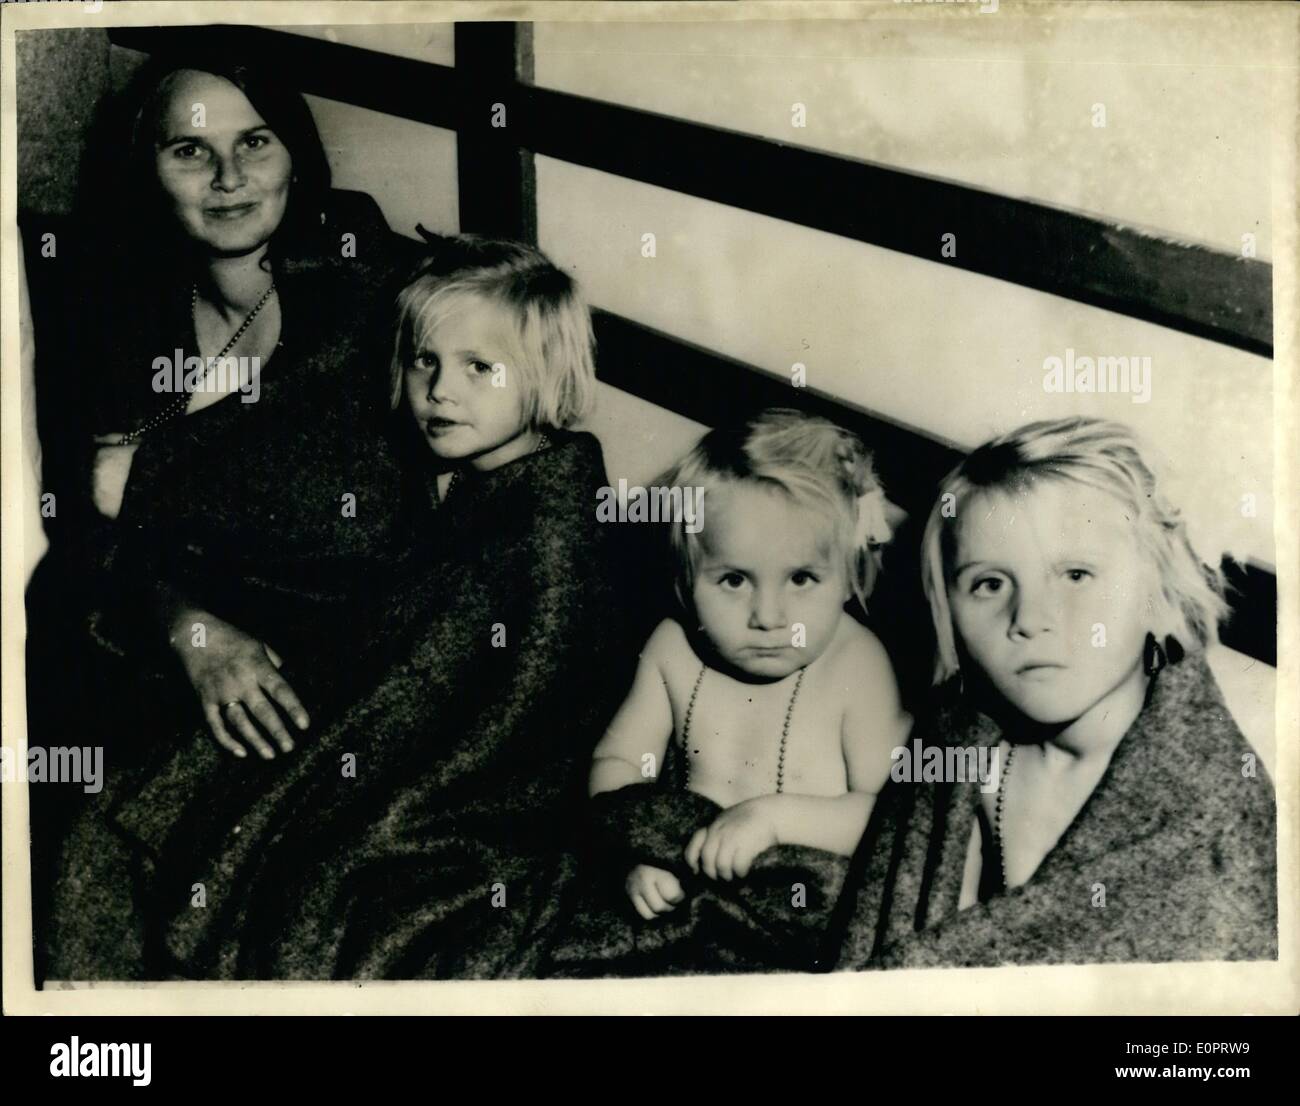 Nov. 11, 1956 - Hungarian Refugees Arrive In Switzerland.: Some 200 Hungarian refugees - mainly whole families with children, arrived at the Swiss frontier on Thursday - where they are the guests of the Swiss Red Cross. Photo shows this mother from Hegyeshalem is pictured with her three children after their arrival in Switzerland. Their father died fighting against the Russians. Stock Photo